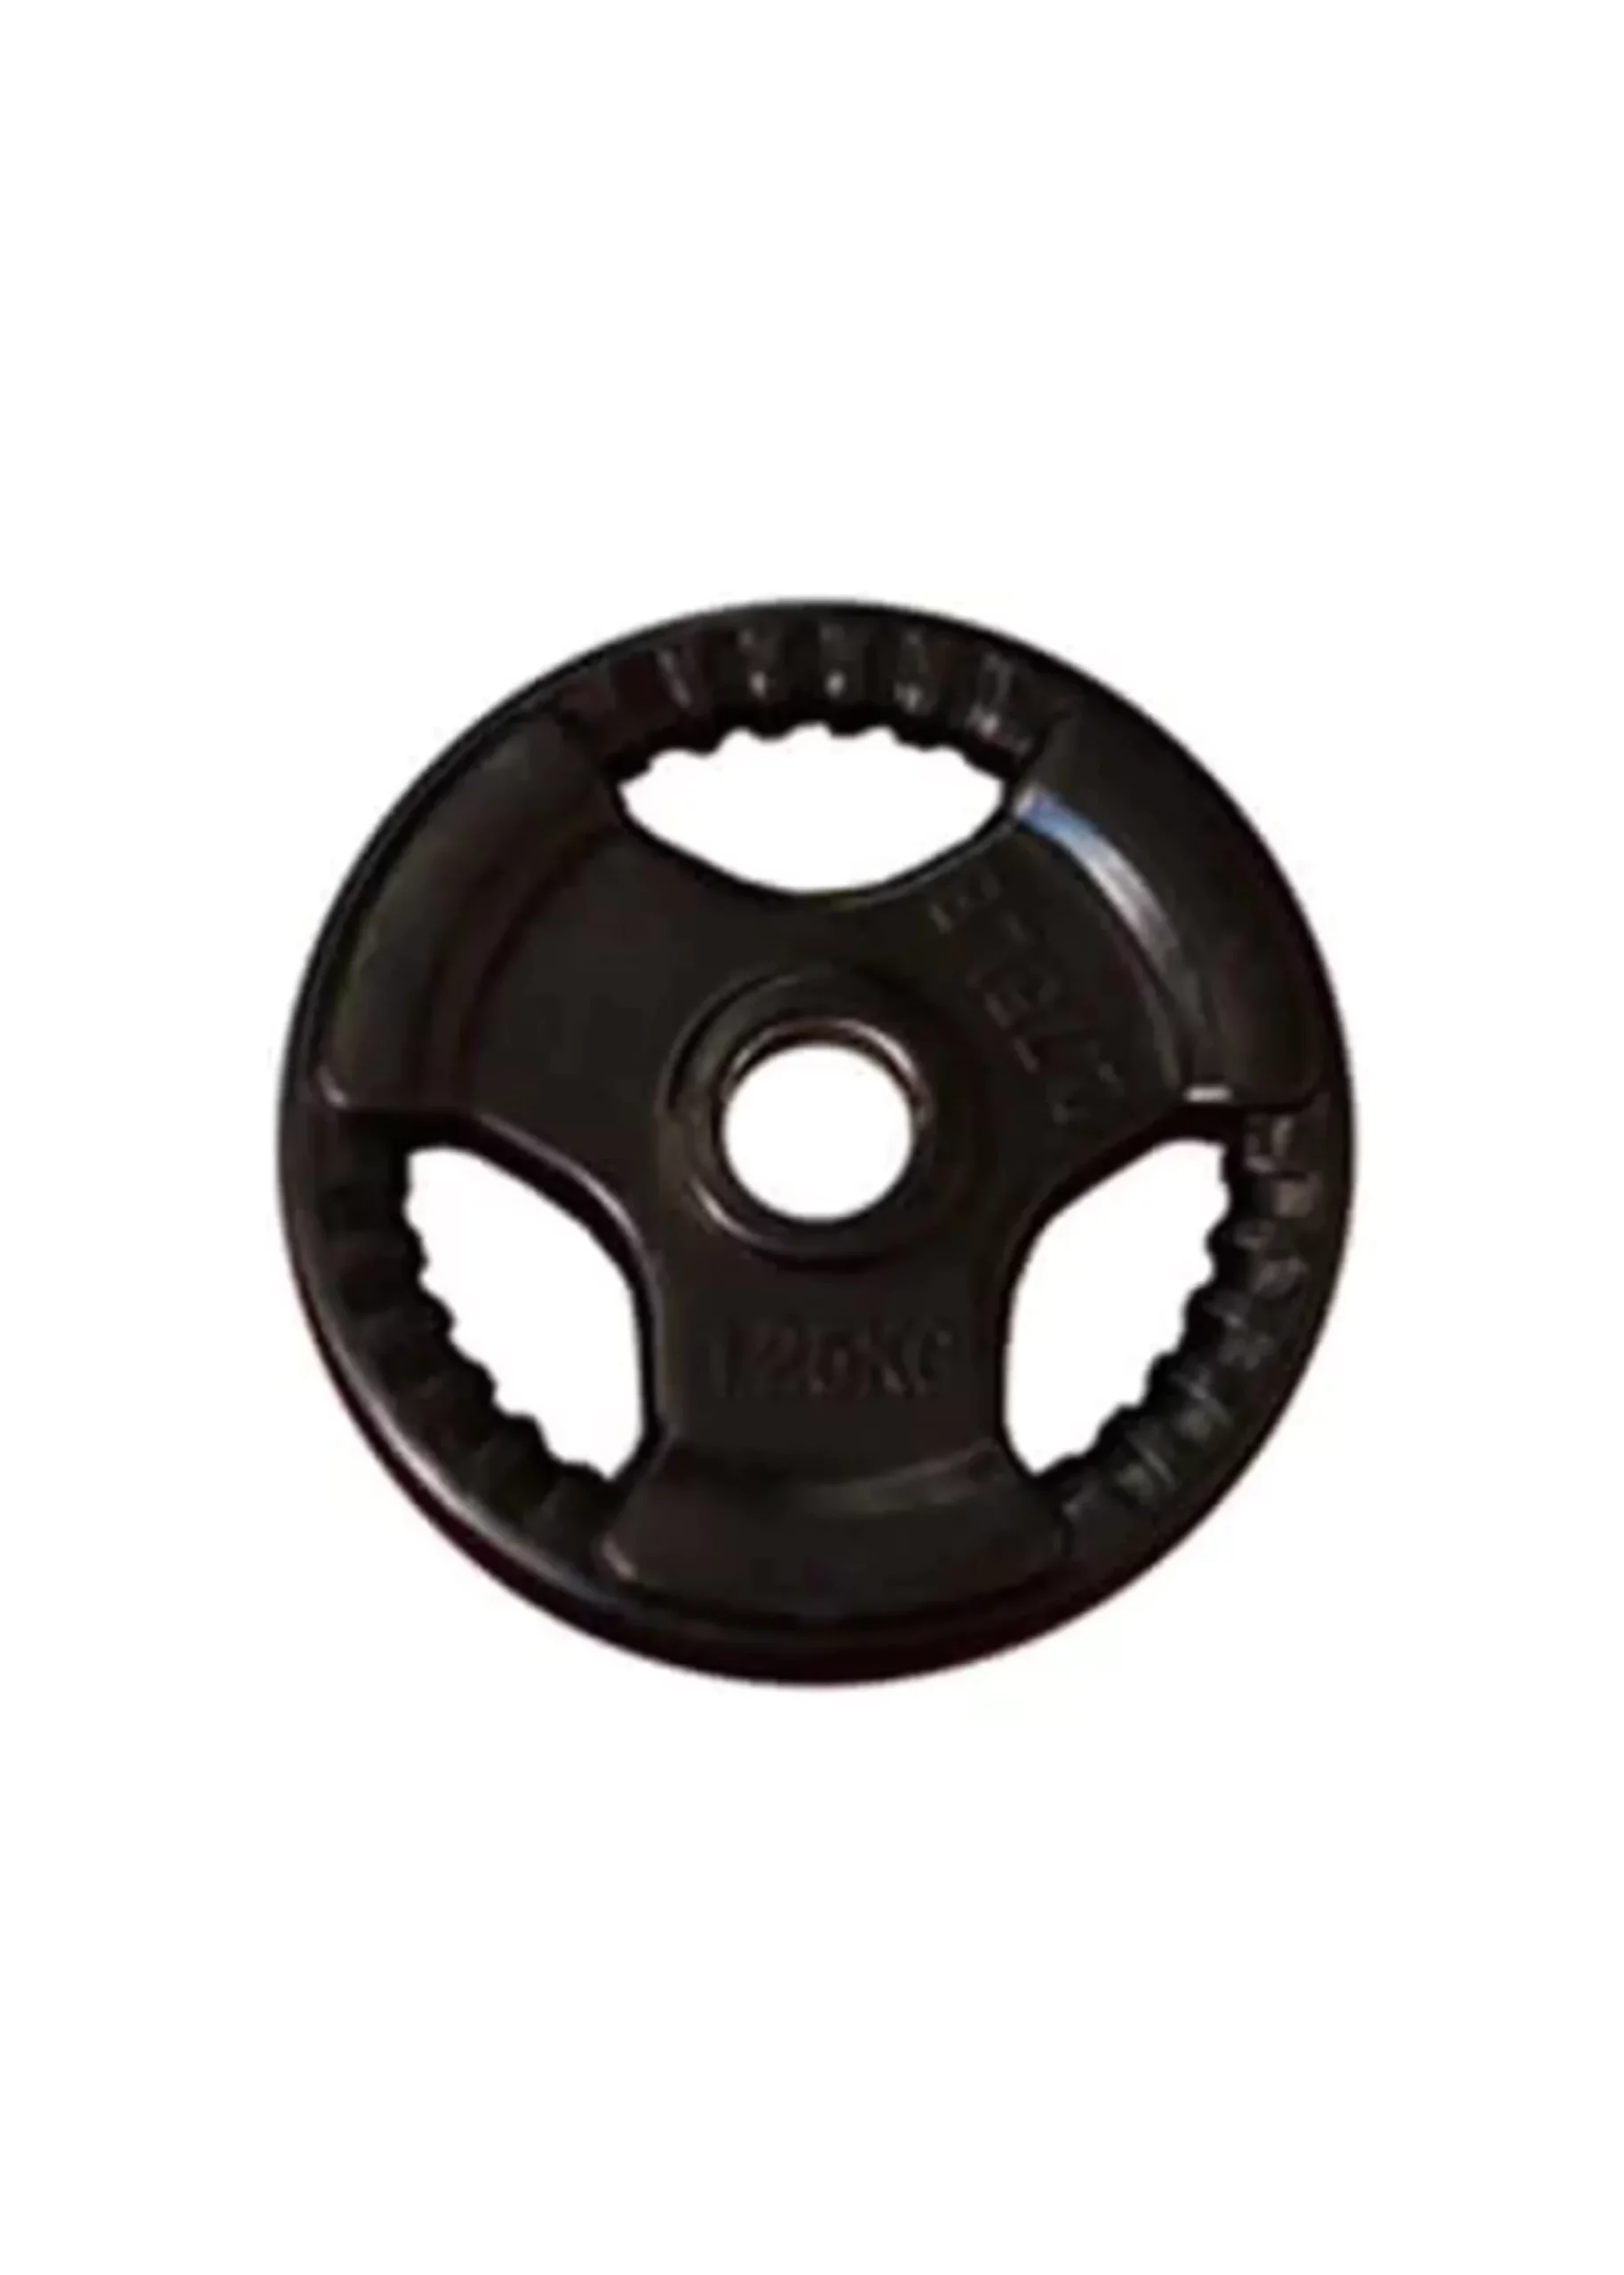 TRIPGRIP RUBBER COATED OLYMPIC PLATE